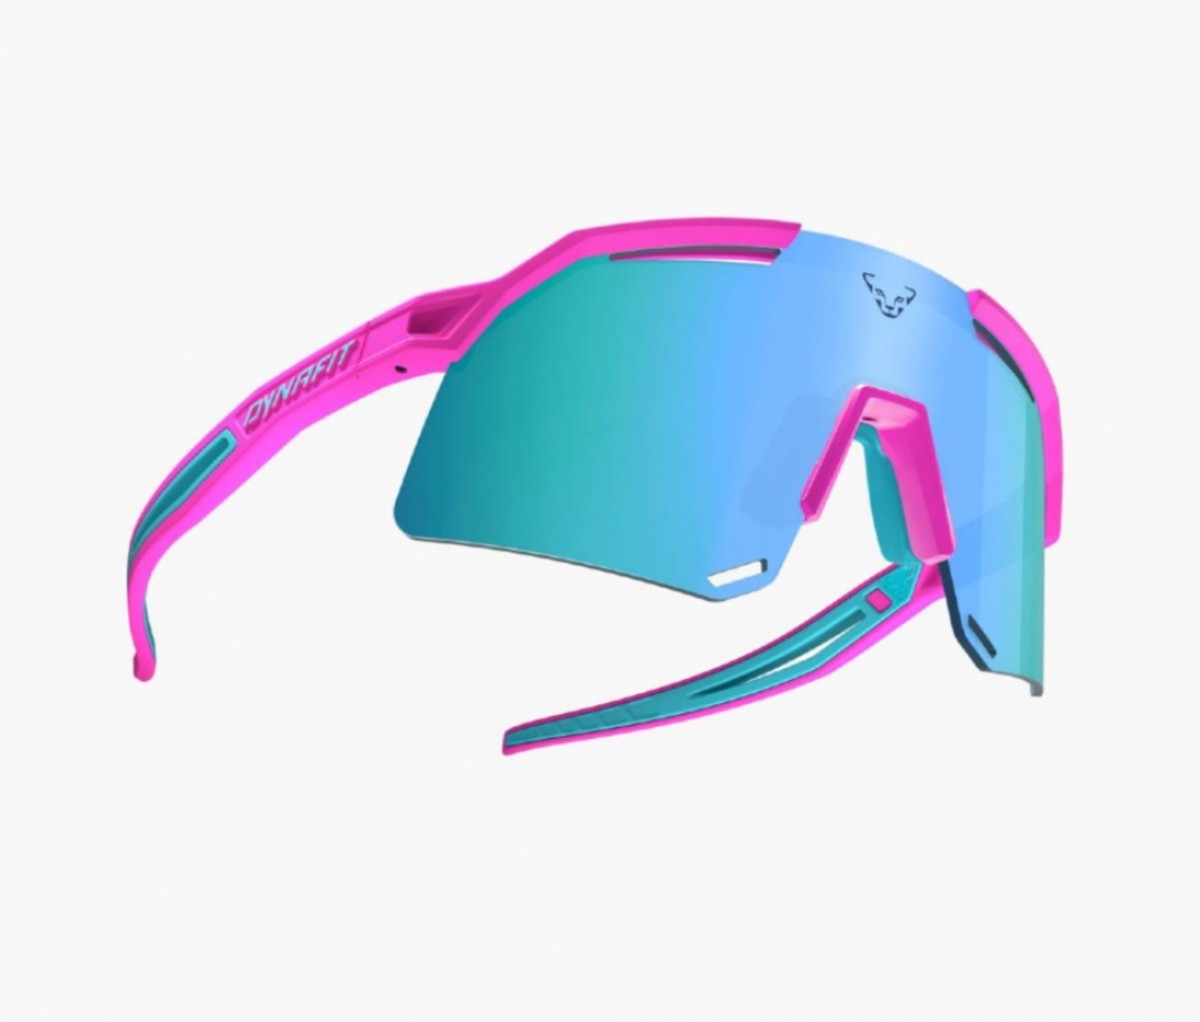 Blue and green mirrored sunglasses with pink frame on a white background.